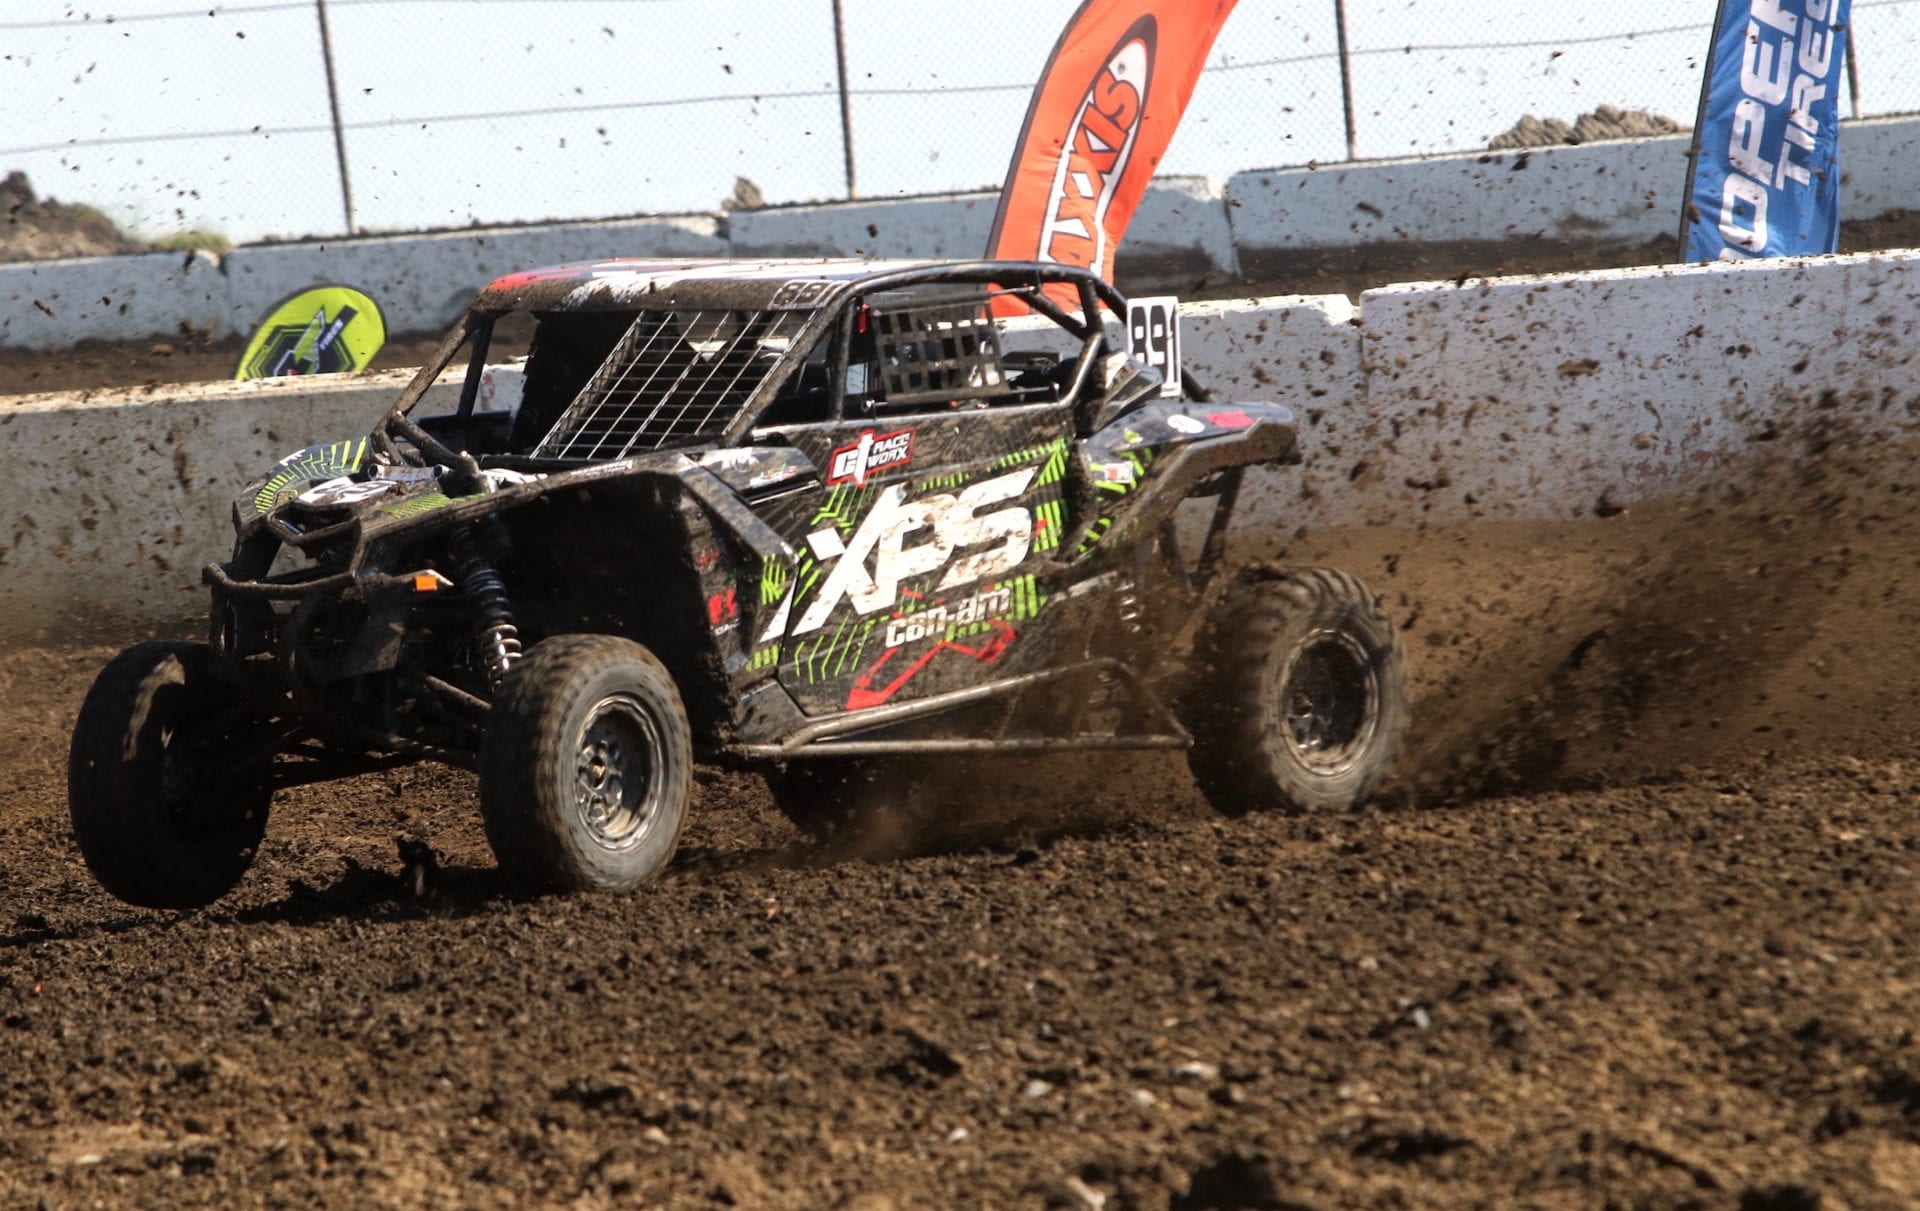 Tim Farr Wins TORC Race In Chicago